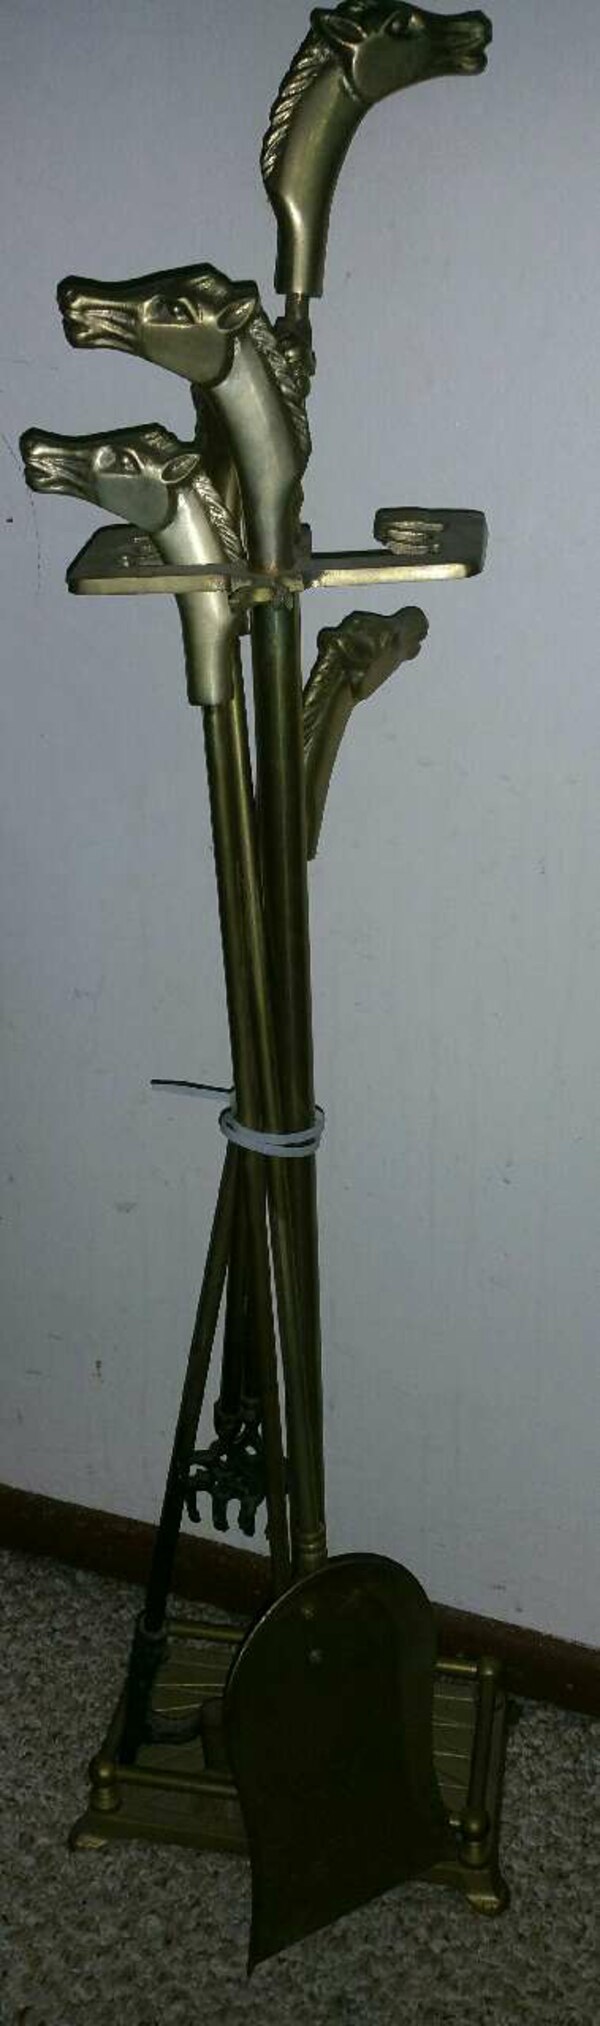 Fireplace tongs Lovely Brass Horse Head Fireplace tools